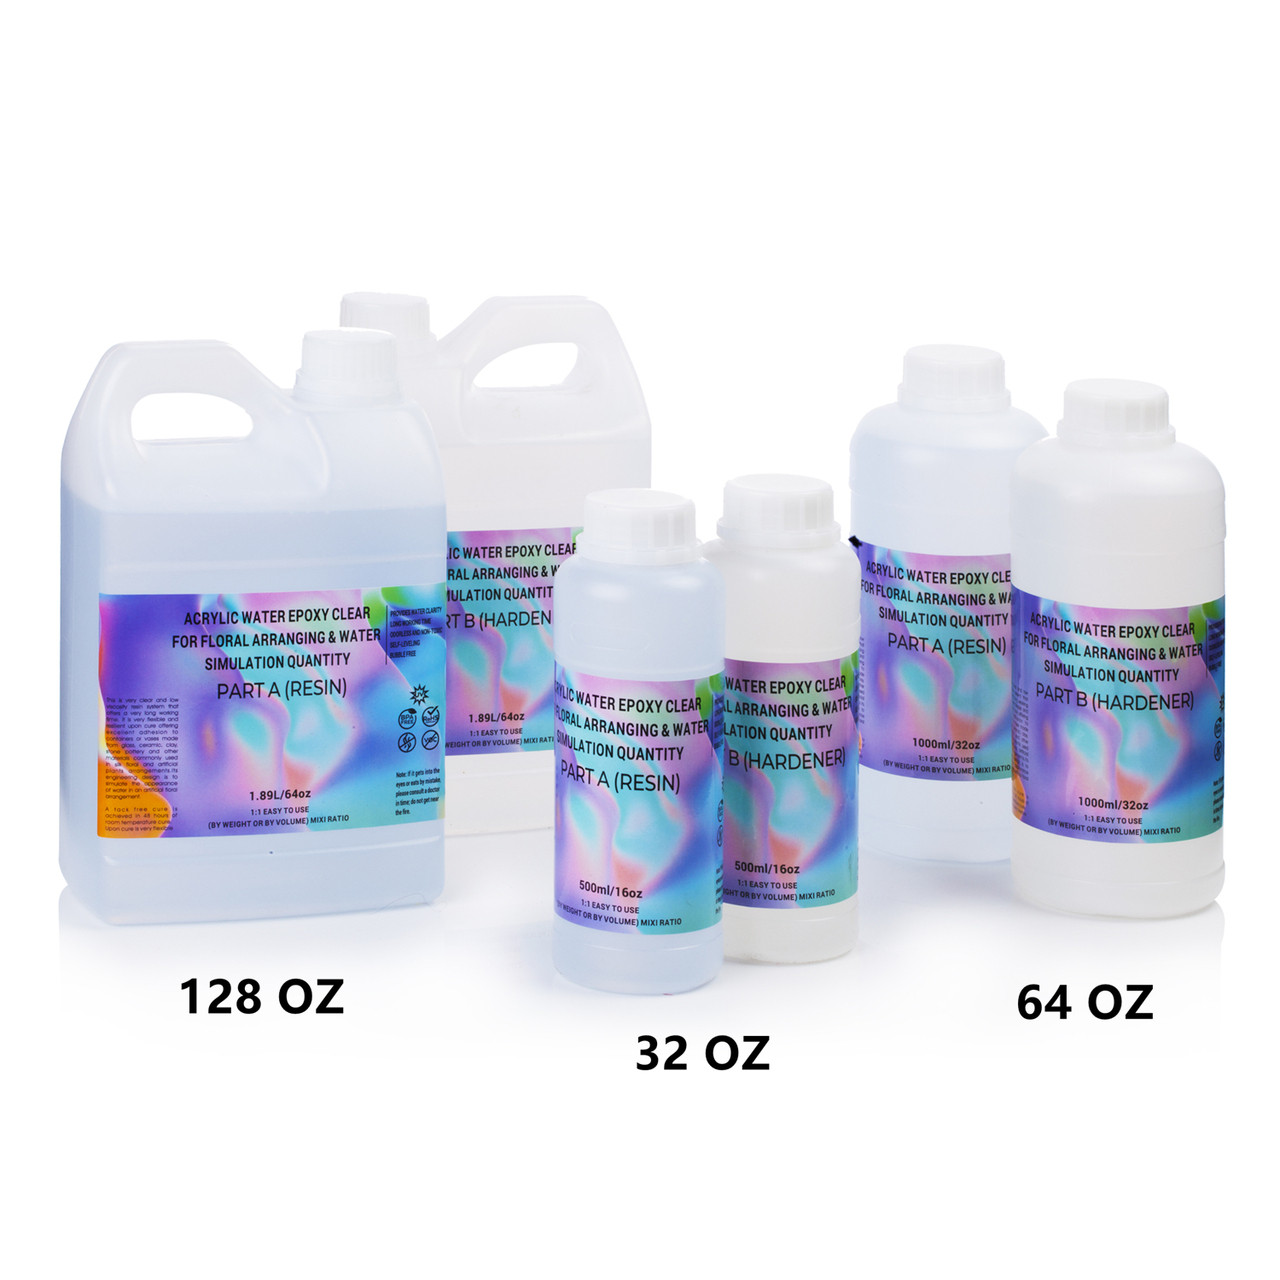 MAX TCR 64 OZ. - ACRYLIC WATER EPOXY CLEAR FOR FLORAL ARRANGING & WATER  SIMULATION - The Epoxy Experts